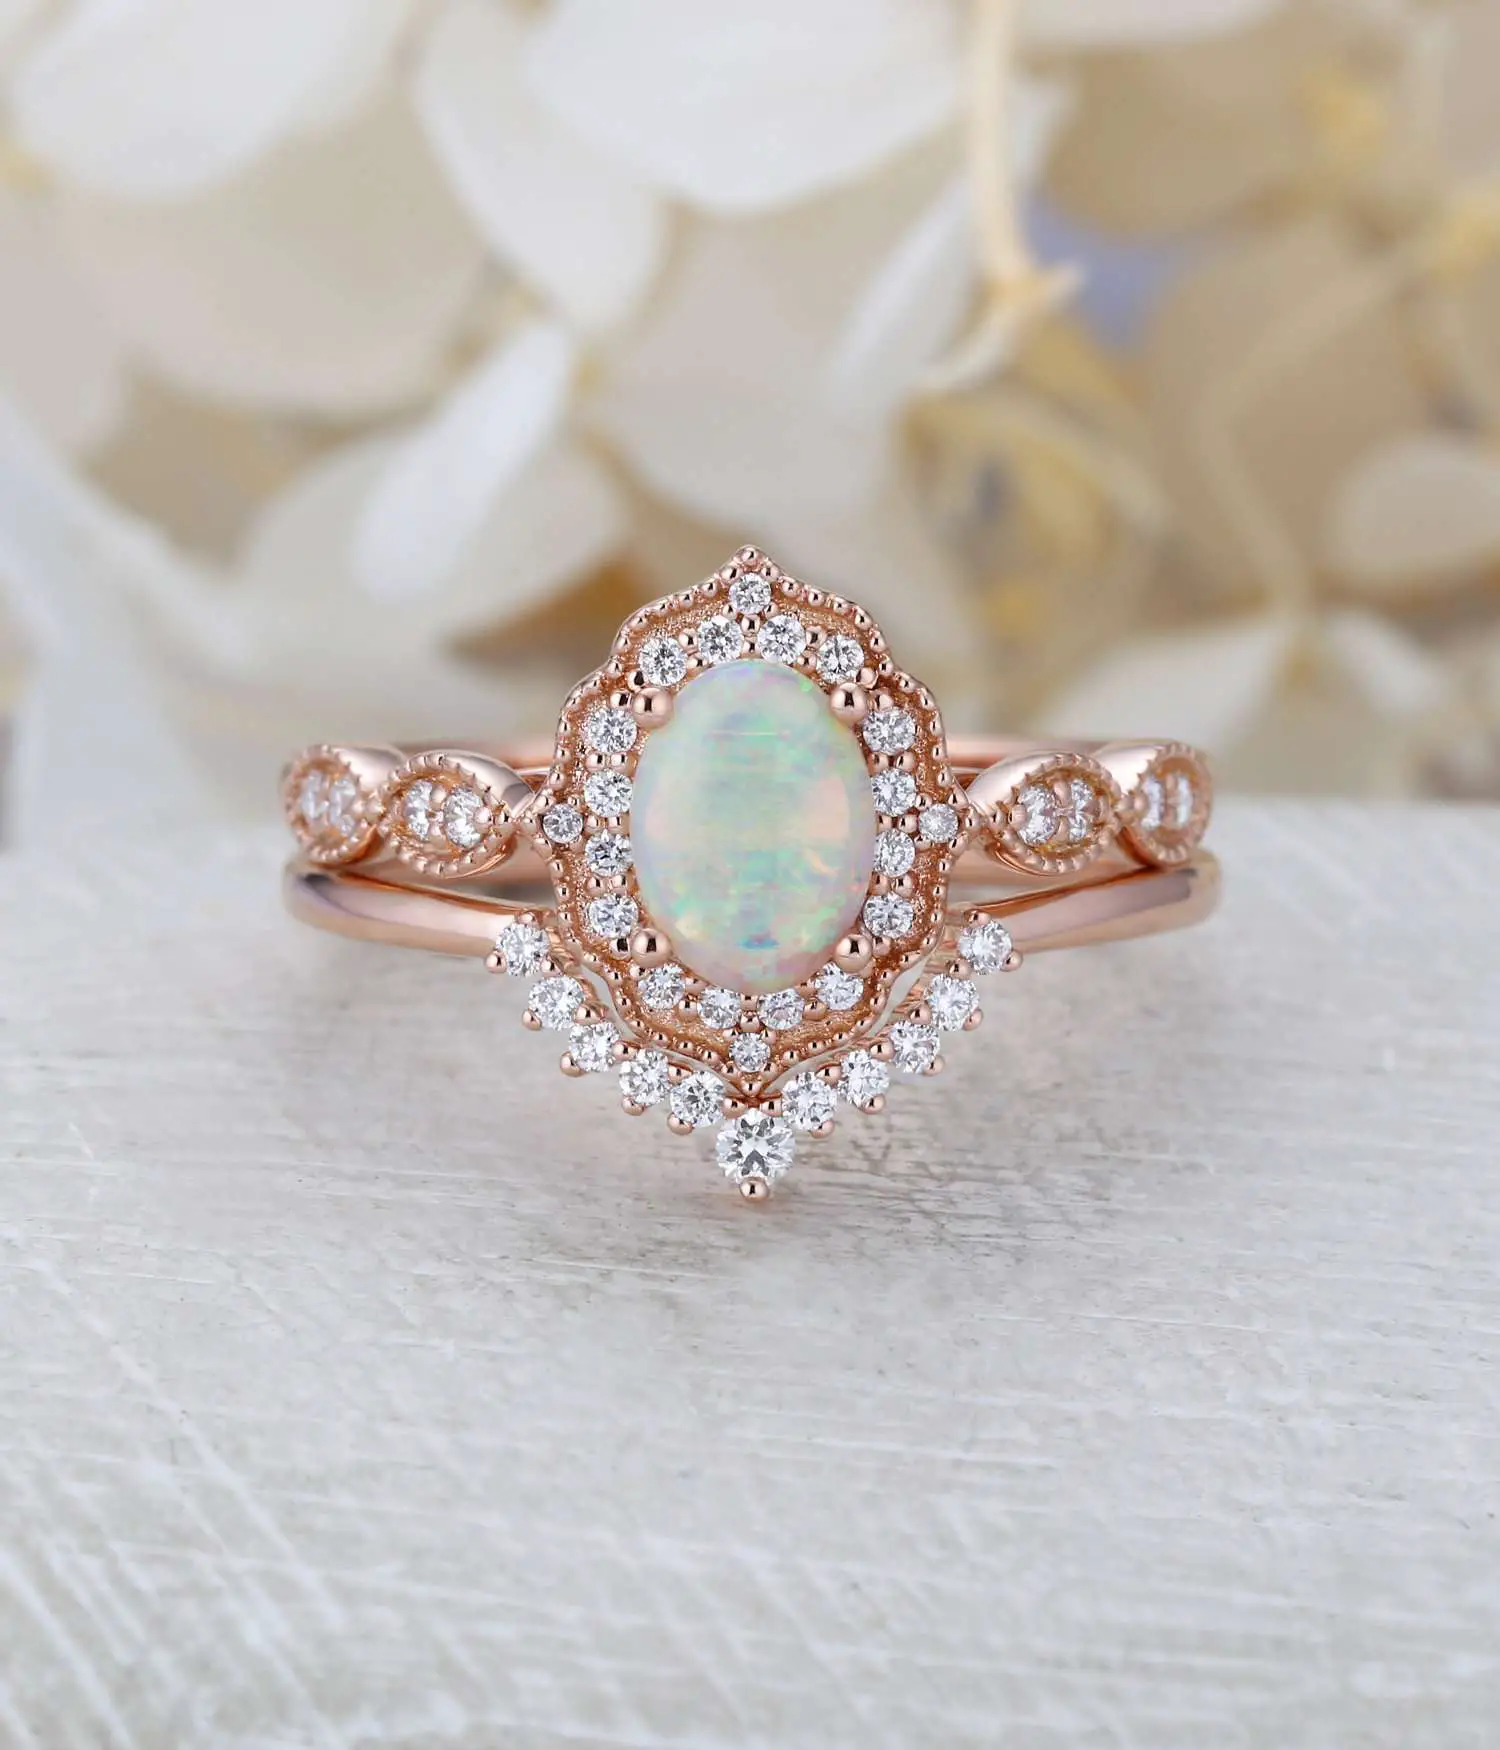 Opal engagement ring women rose gold Halo diamond vintage oval cut ...